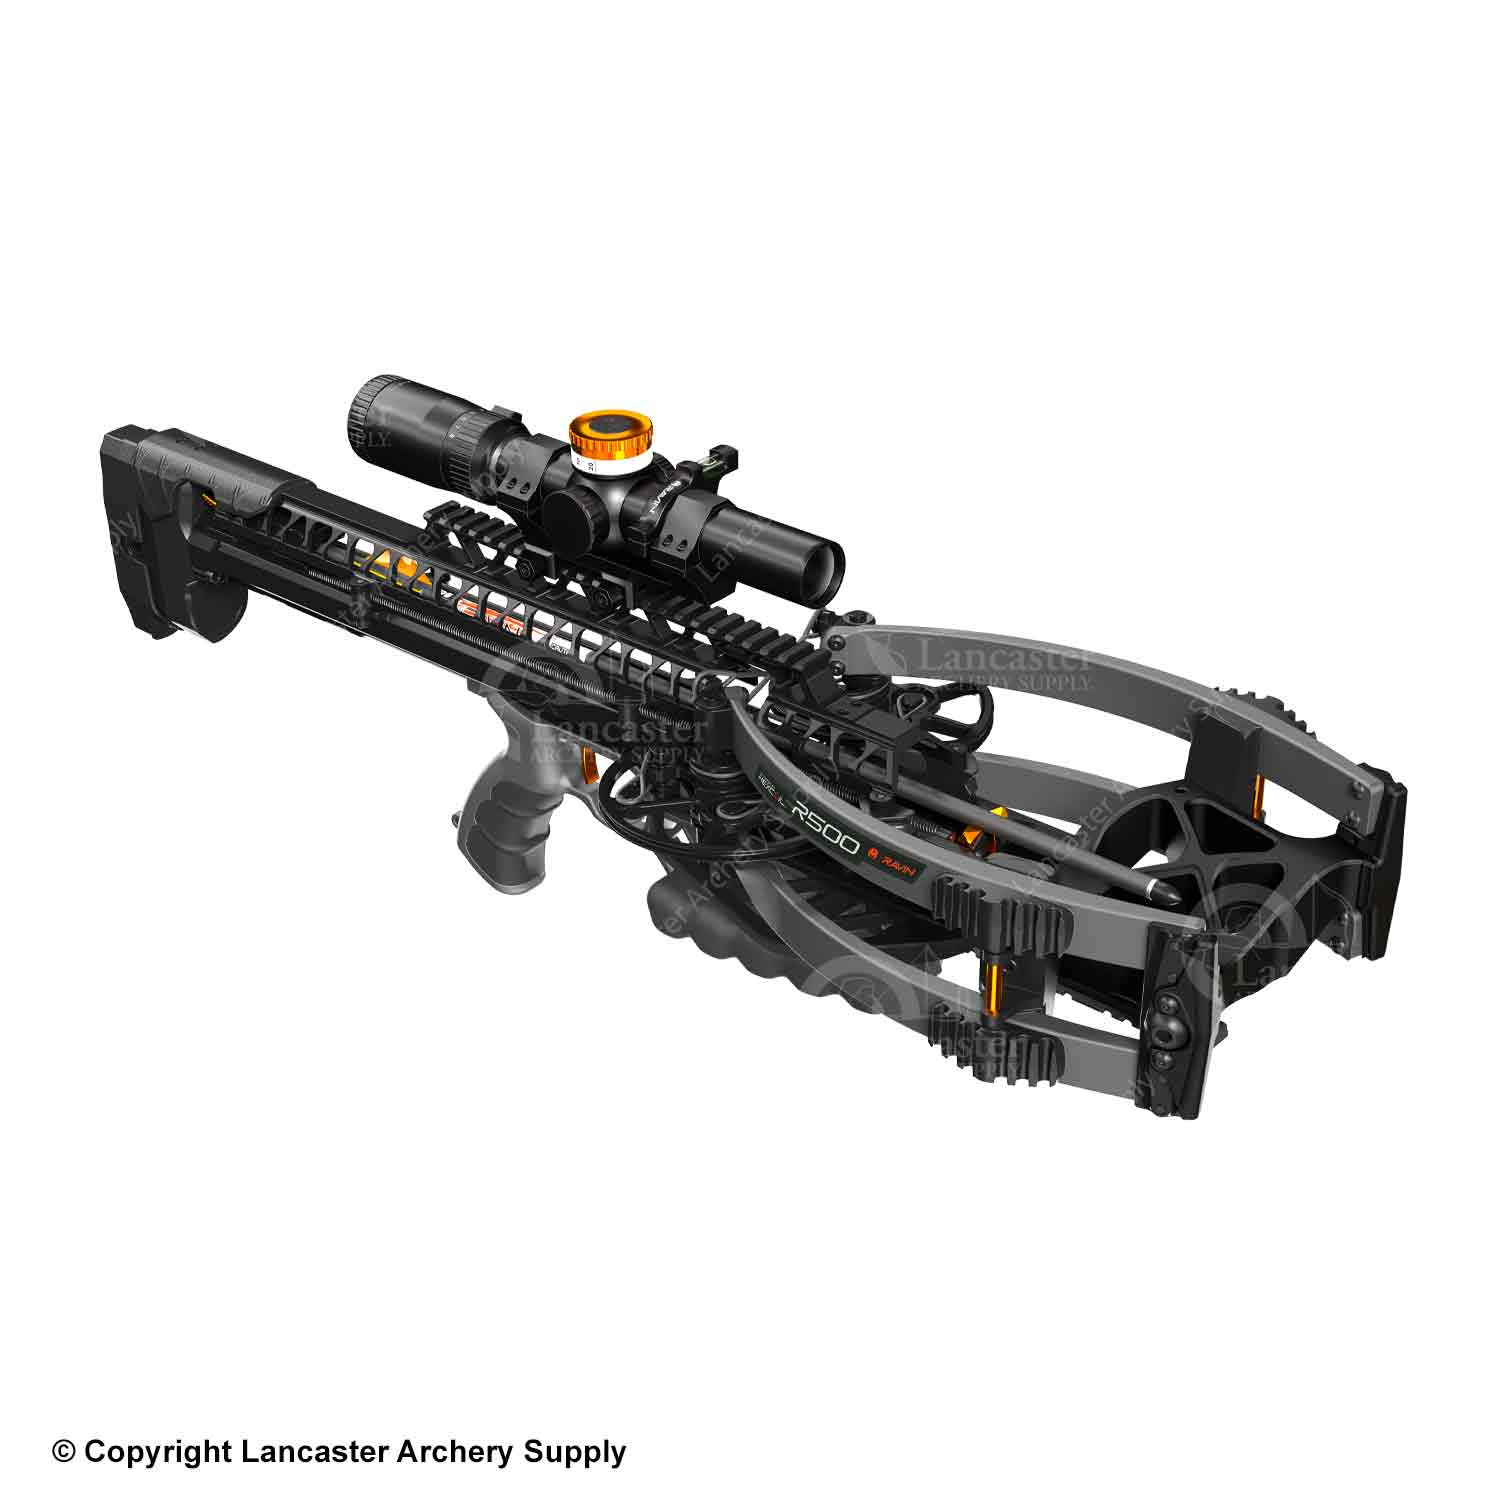 Ravin R500 Sniper Crossbow Package w/ VersaDrive Cocking System